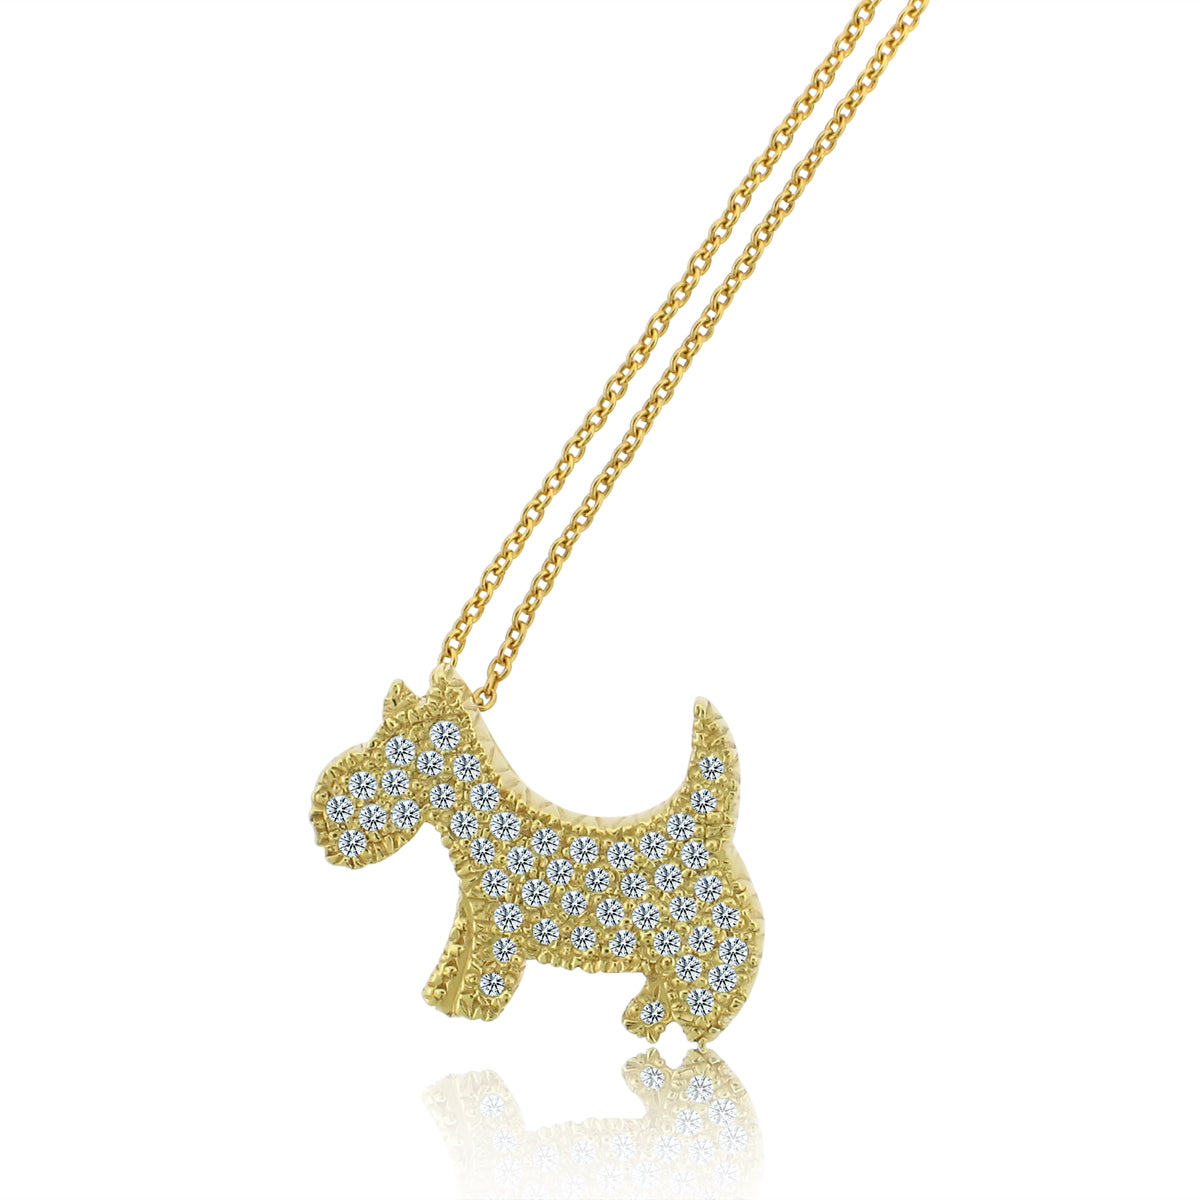 ROBERTO COIN 18K YELLOW GOLD 0.21CT DIAMOND SCOTTY DOG  PENDANT FROM THE TINY TREASURES COLLECTION